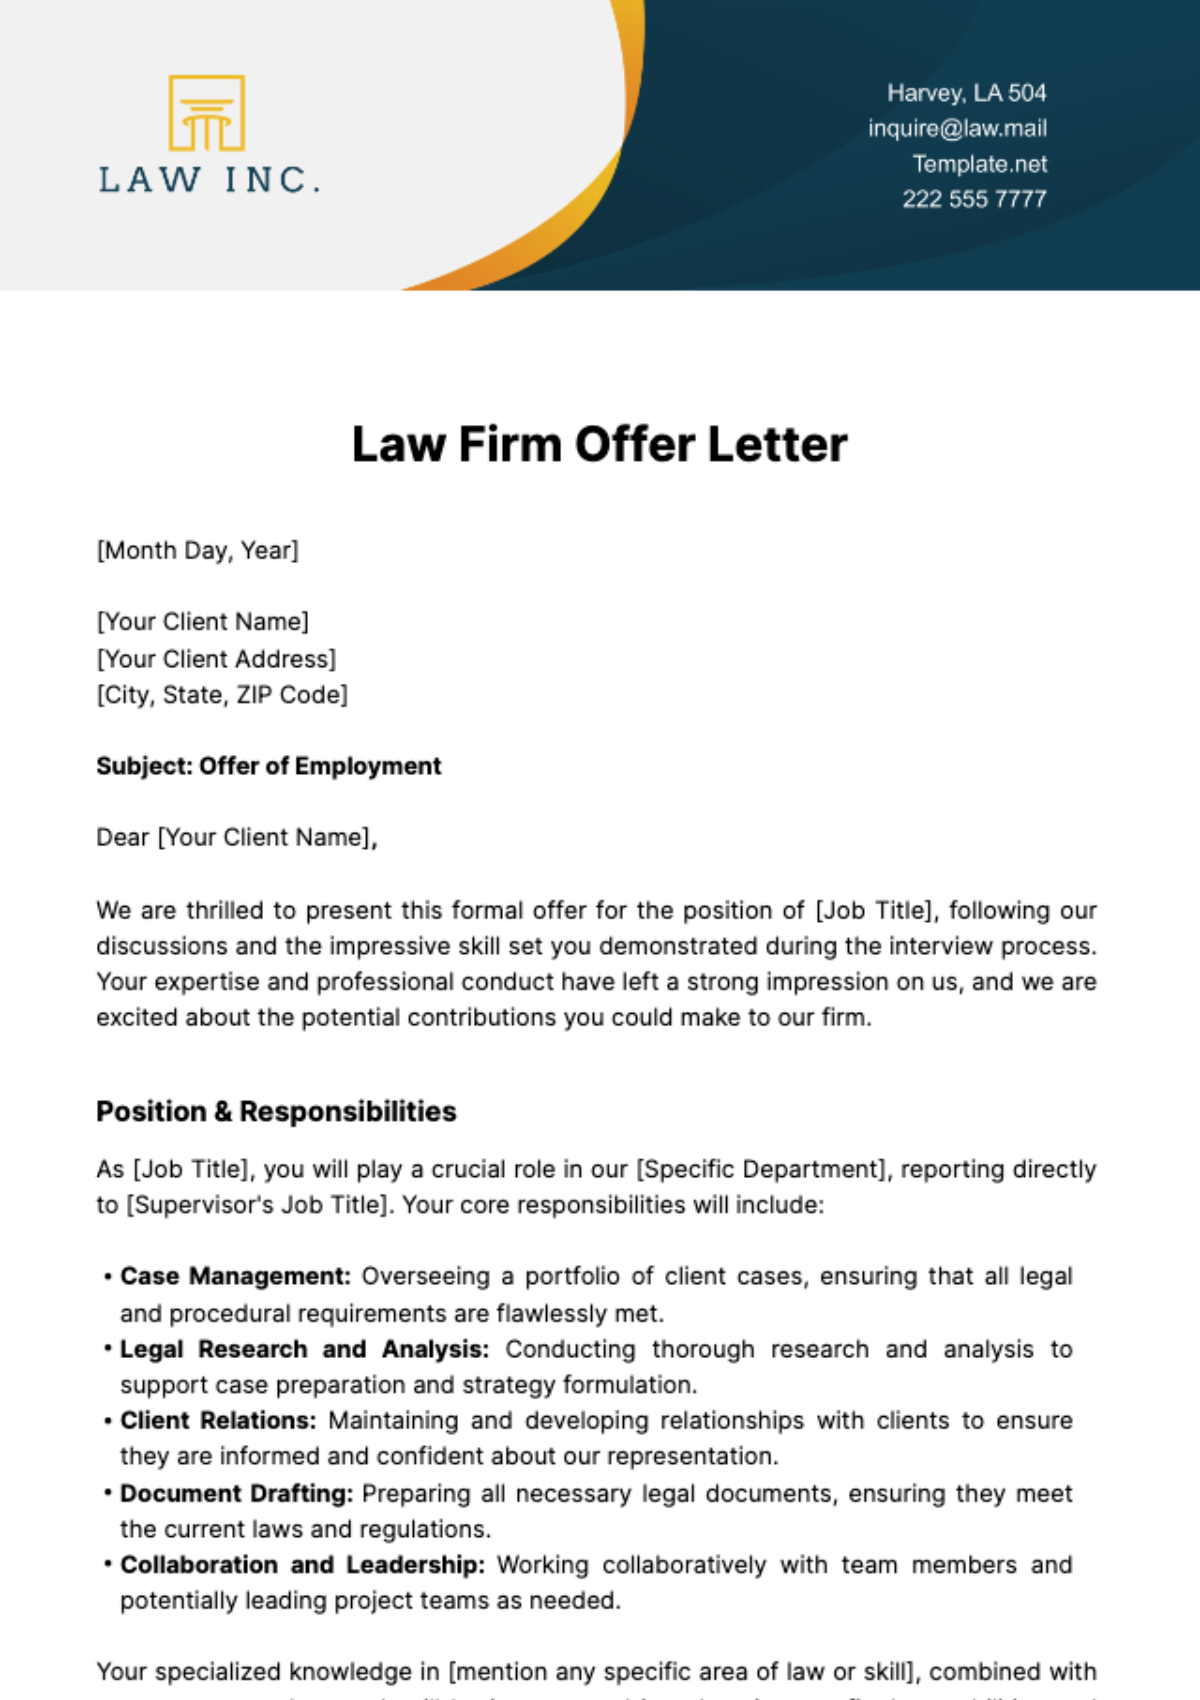 Free Law Firm Offer Letter Template